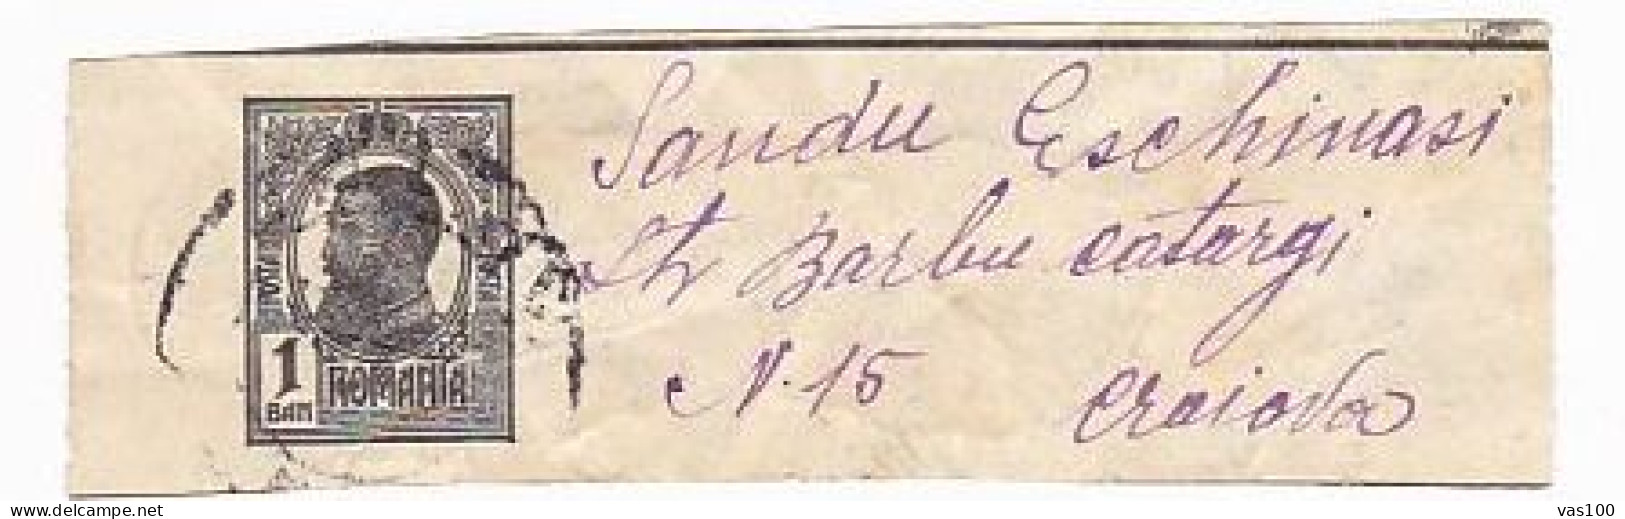 KING CAROL I NEWSPAPER WRAPPING STATIONERY, ENTIER POSTAL, ABOUT 1890, ROMANIA - Lettres & Documents